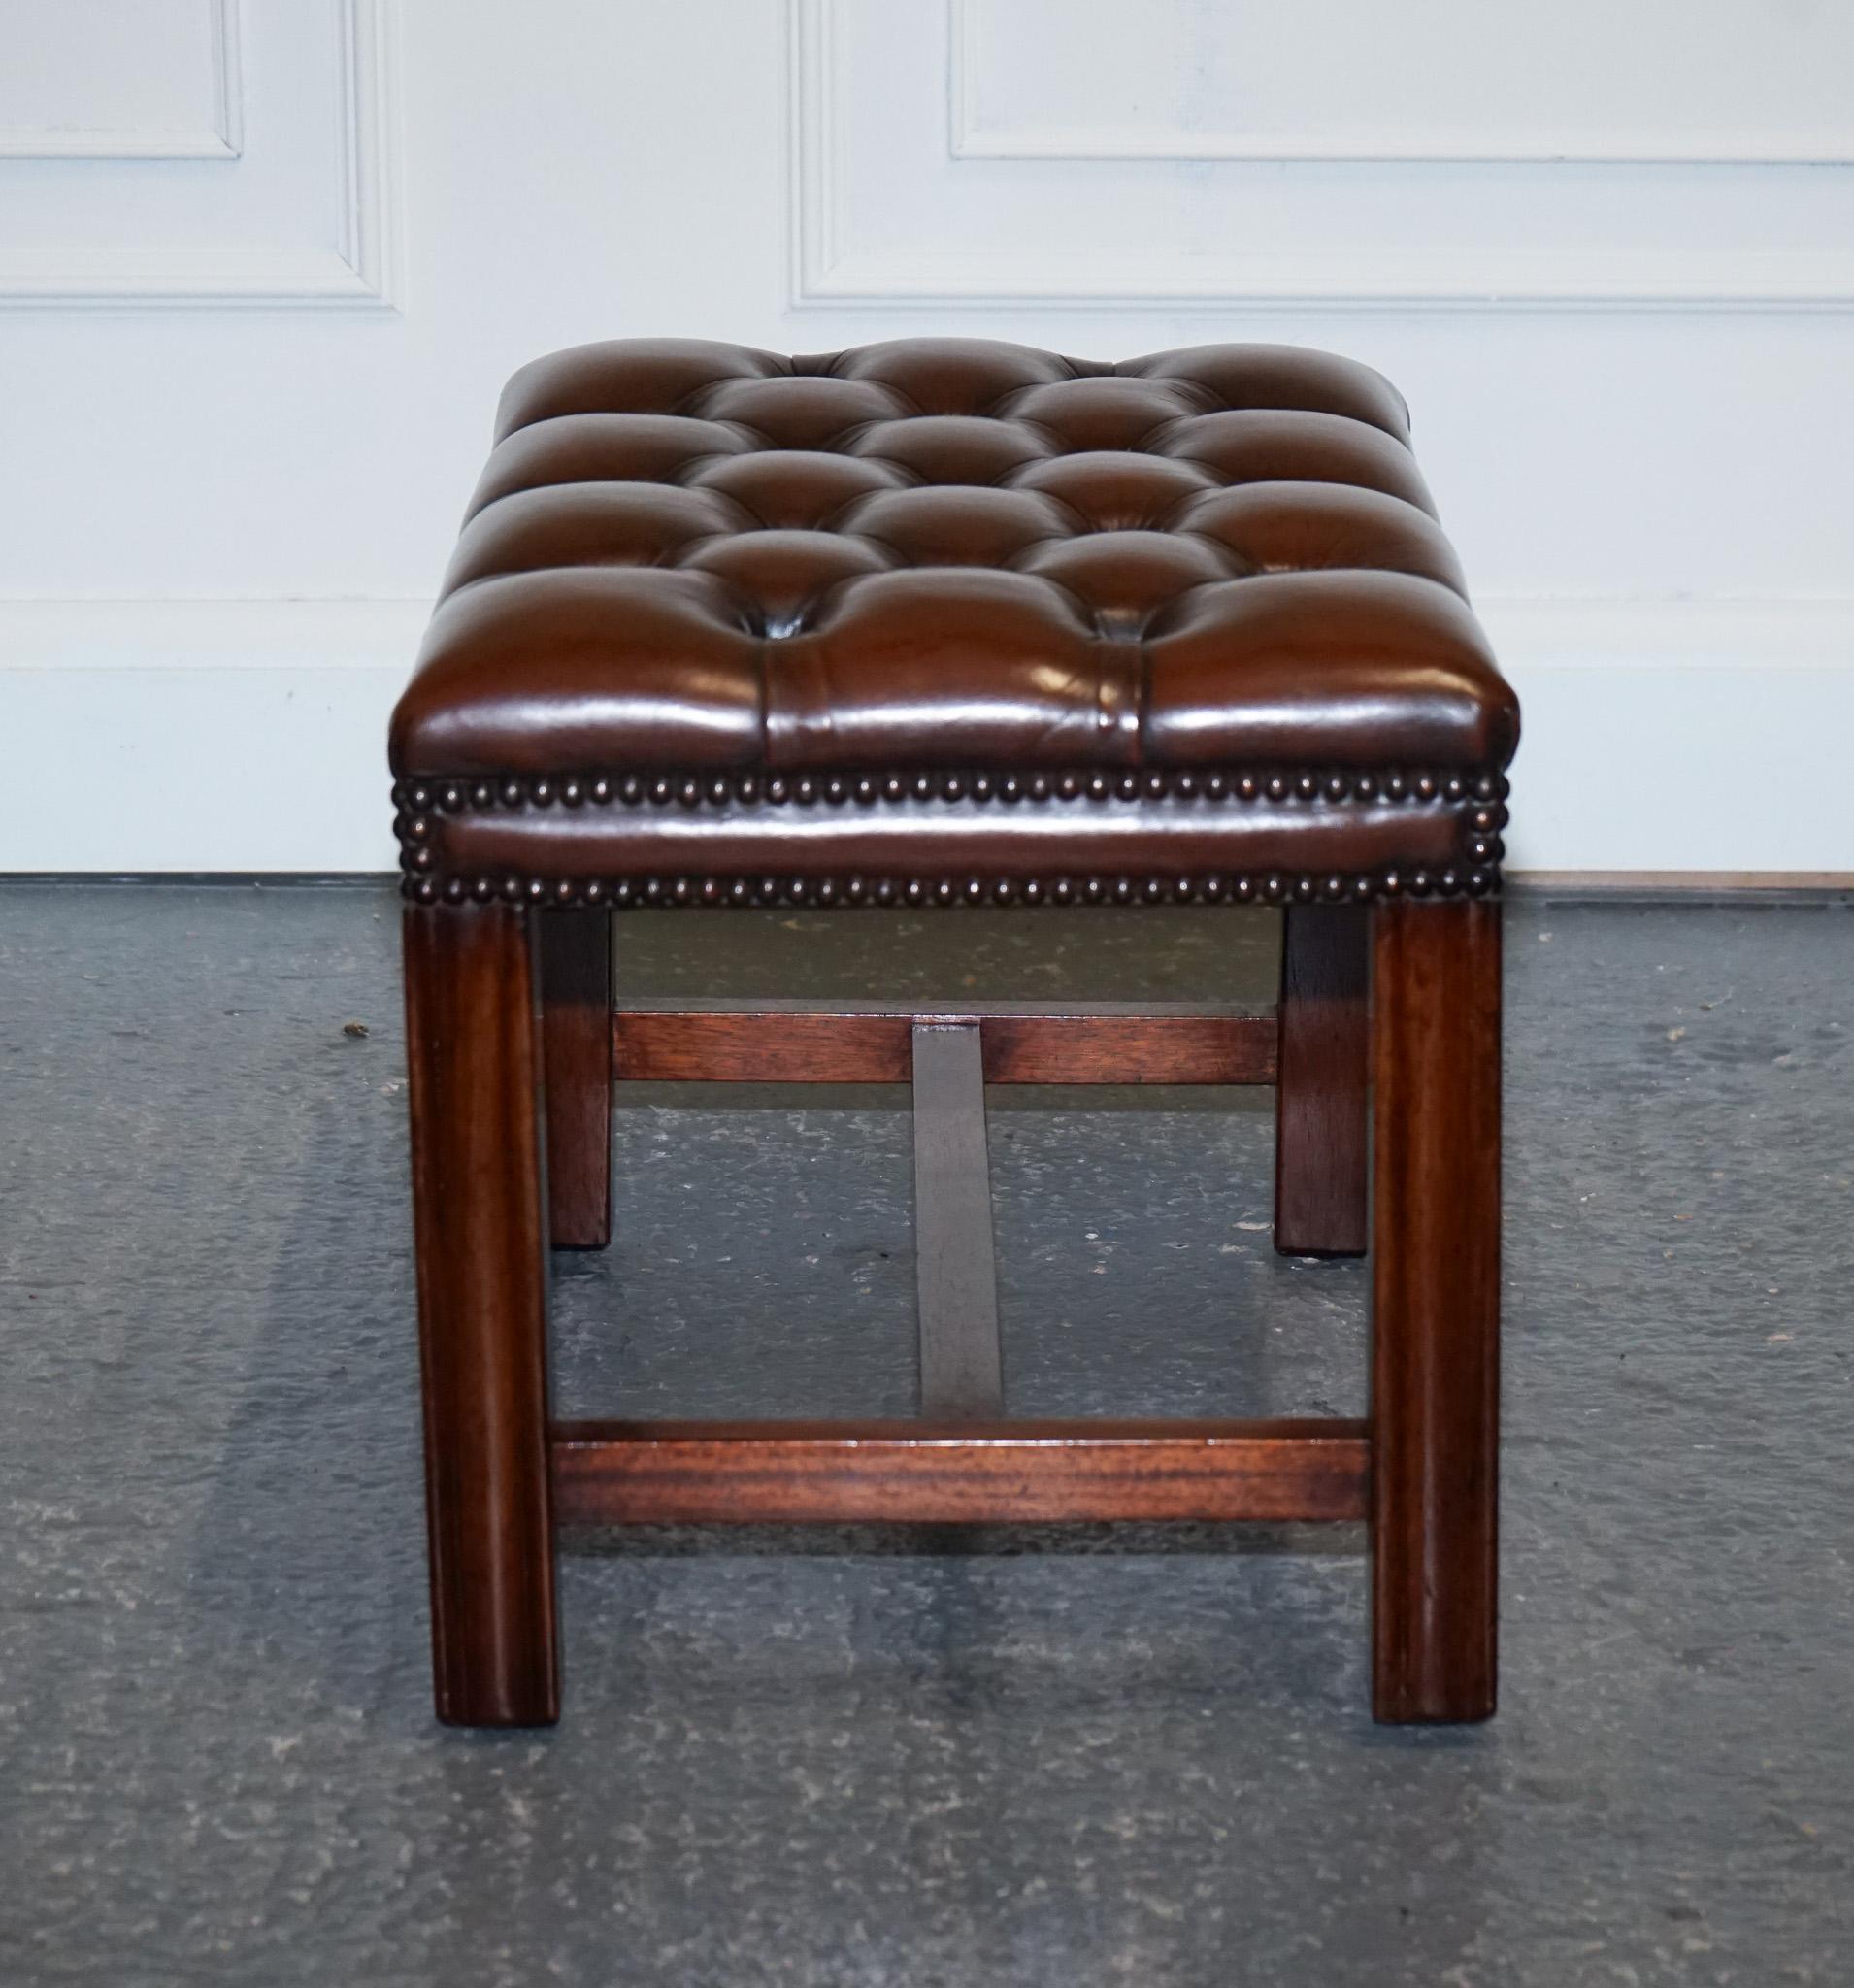 VINTAGE RESTORED CHESTERFiELD HAND DYED BROWN LEATHER TUFFED FOOTSTOOL (1/2) For Sale 3